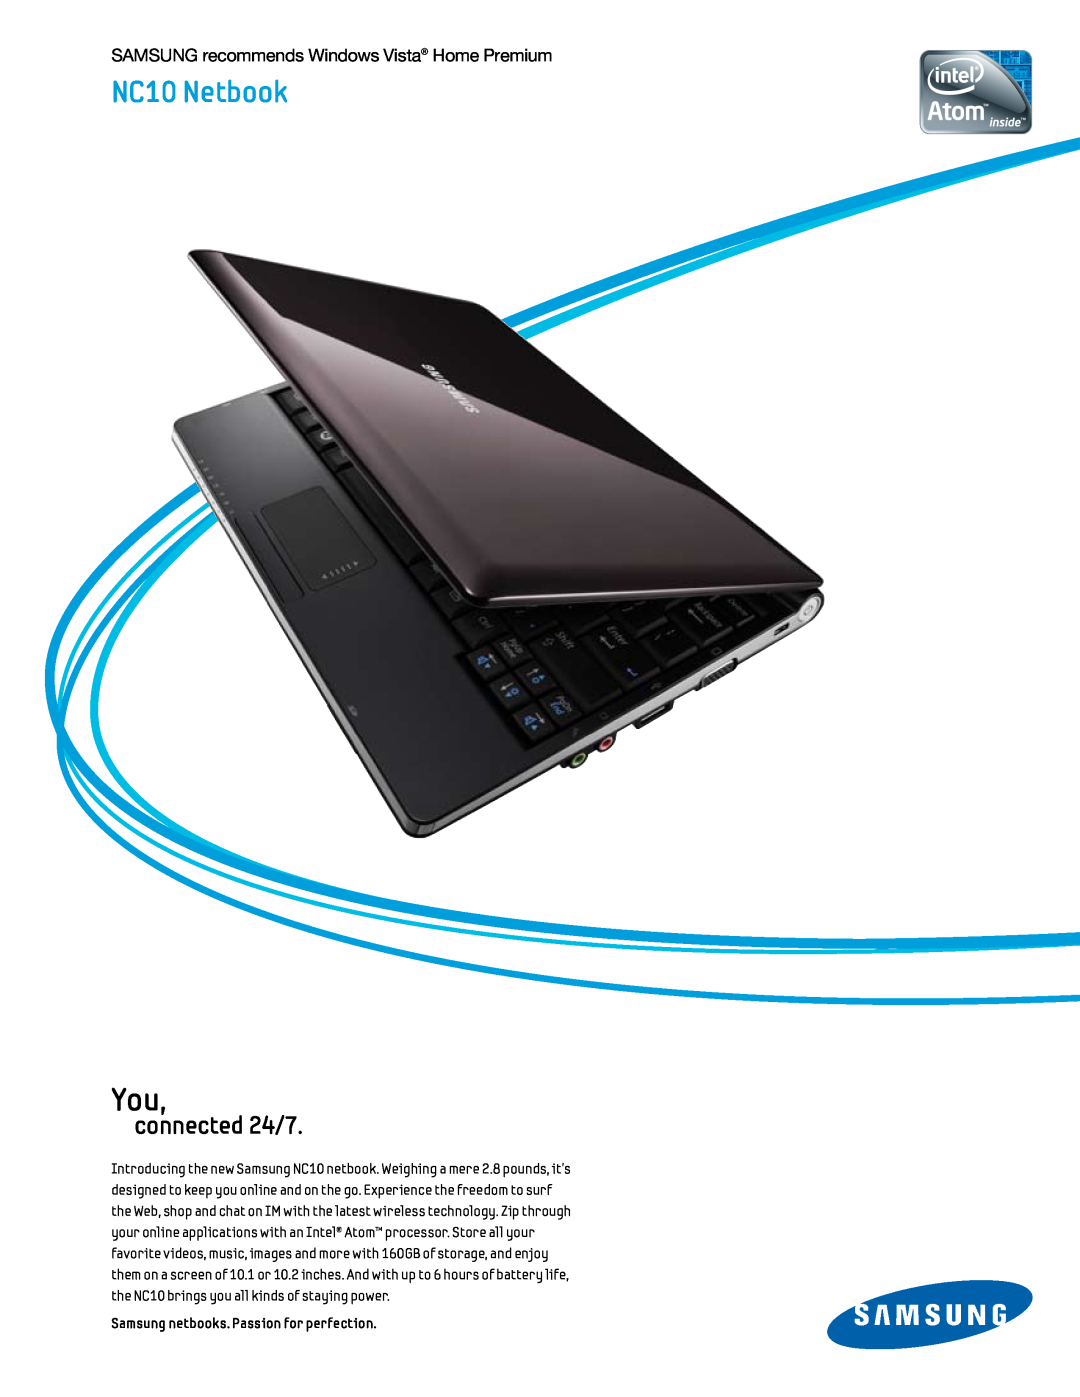 Samsung manual NC10 Netbook, connected 24/7, Samsung recommends Windows Vista Home Premium 